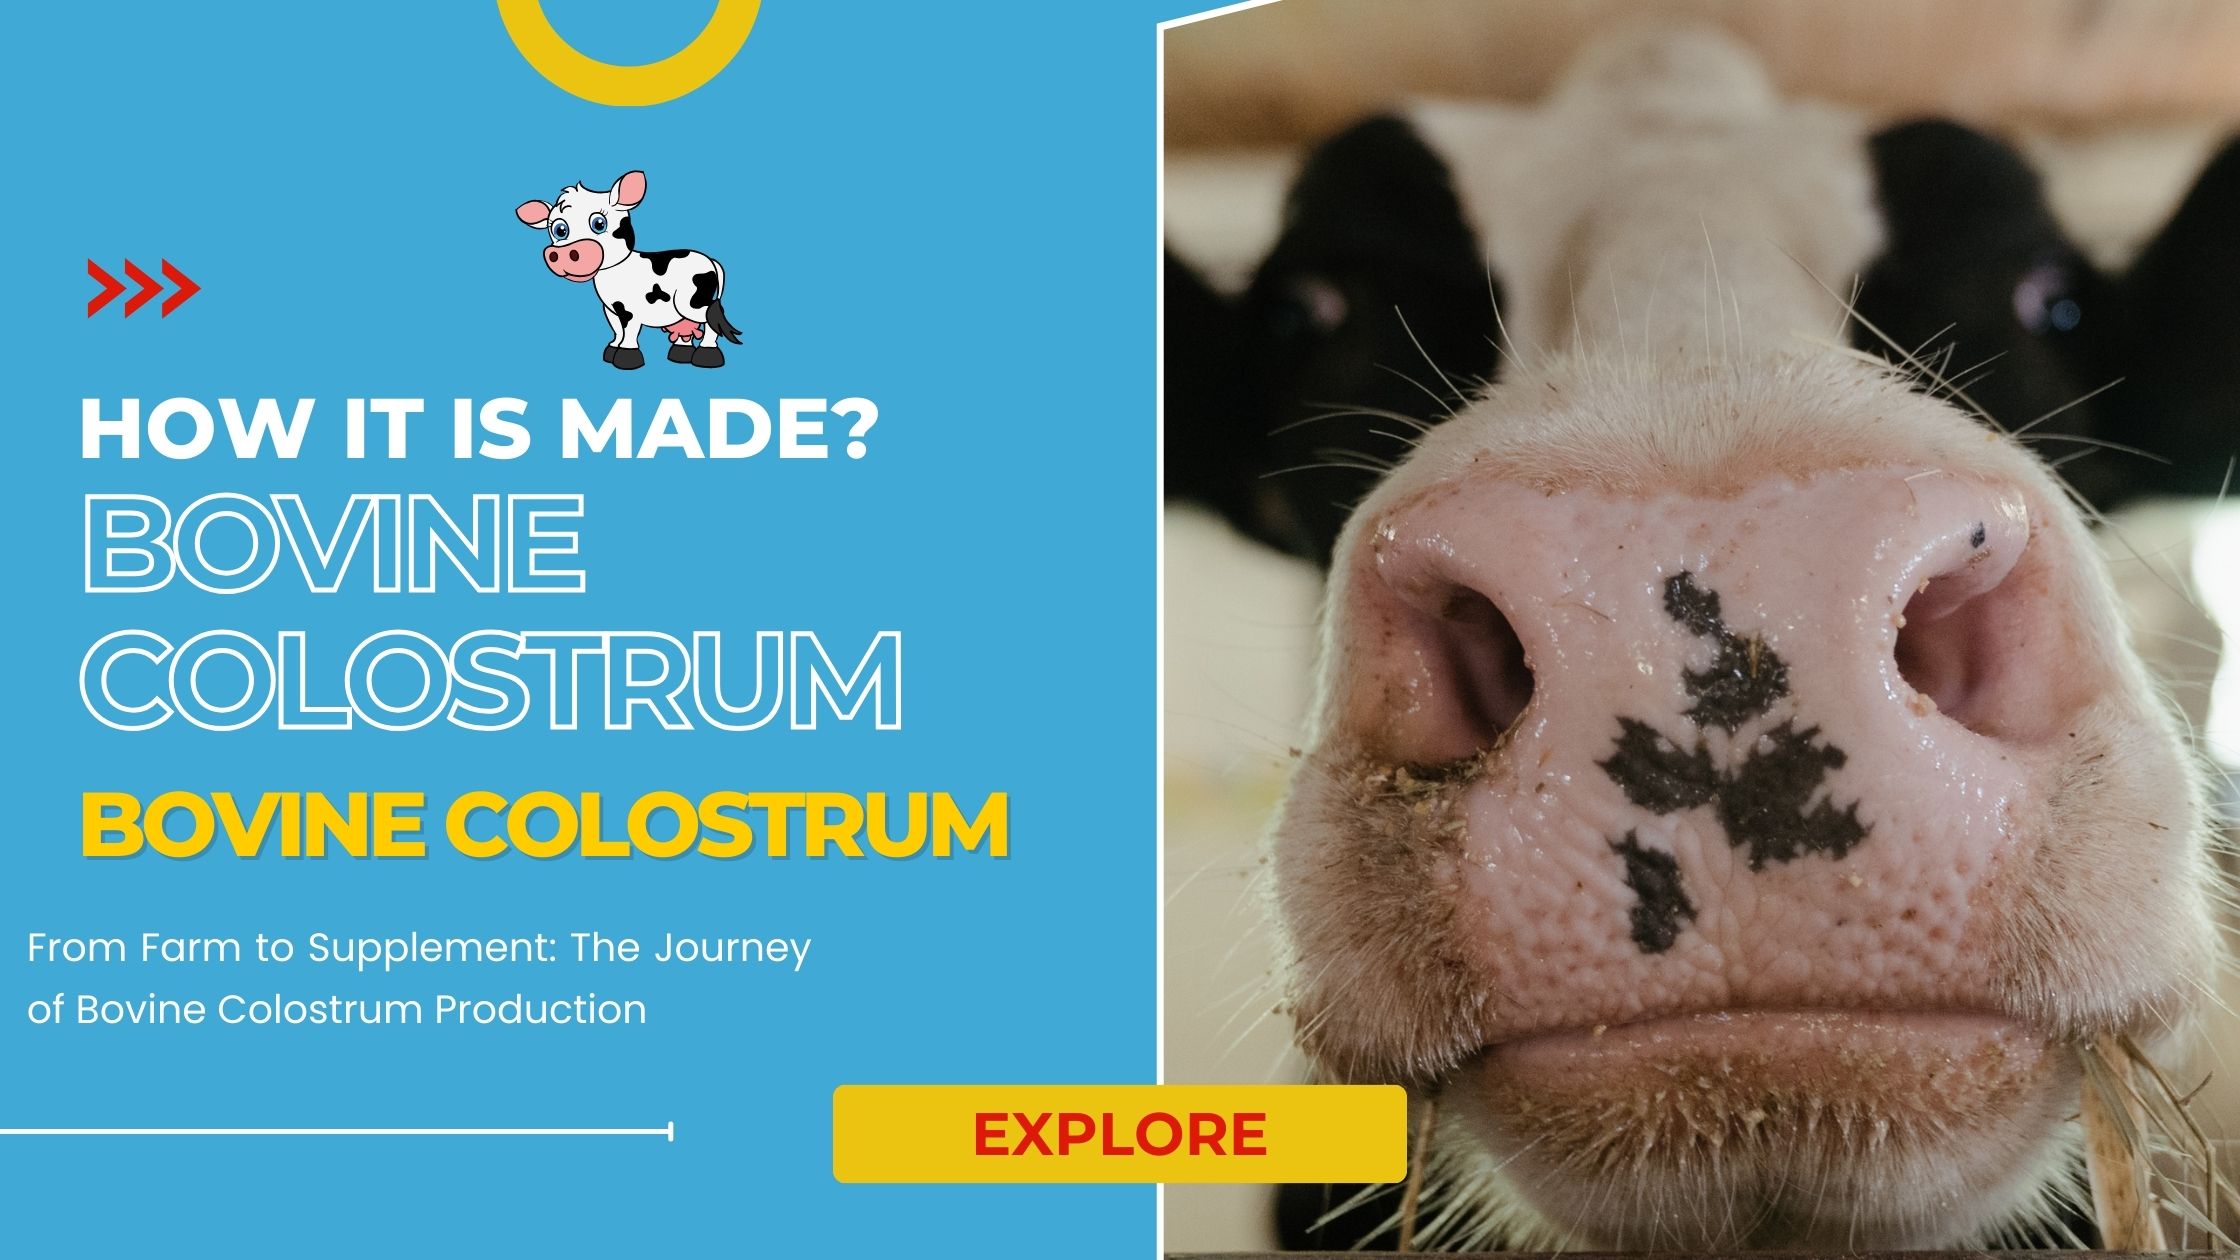 How Bovine Colostrum Is Made